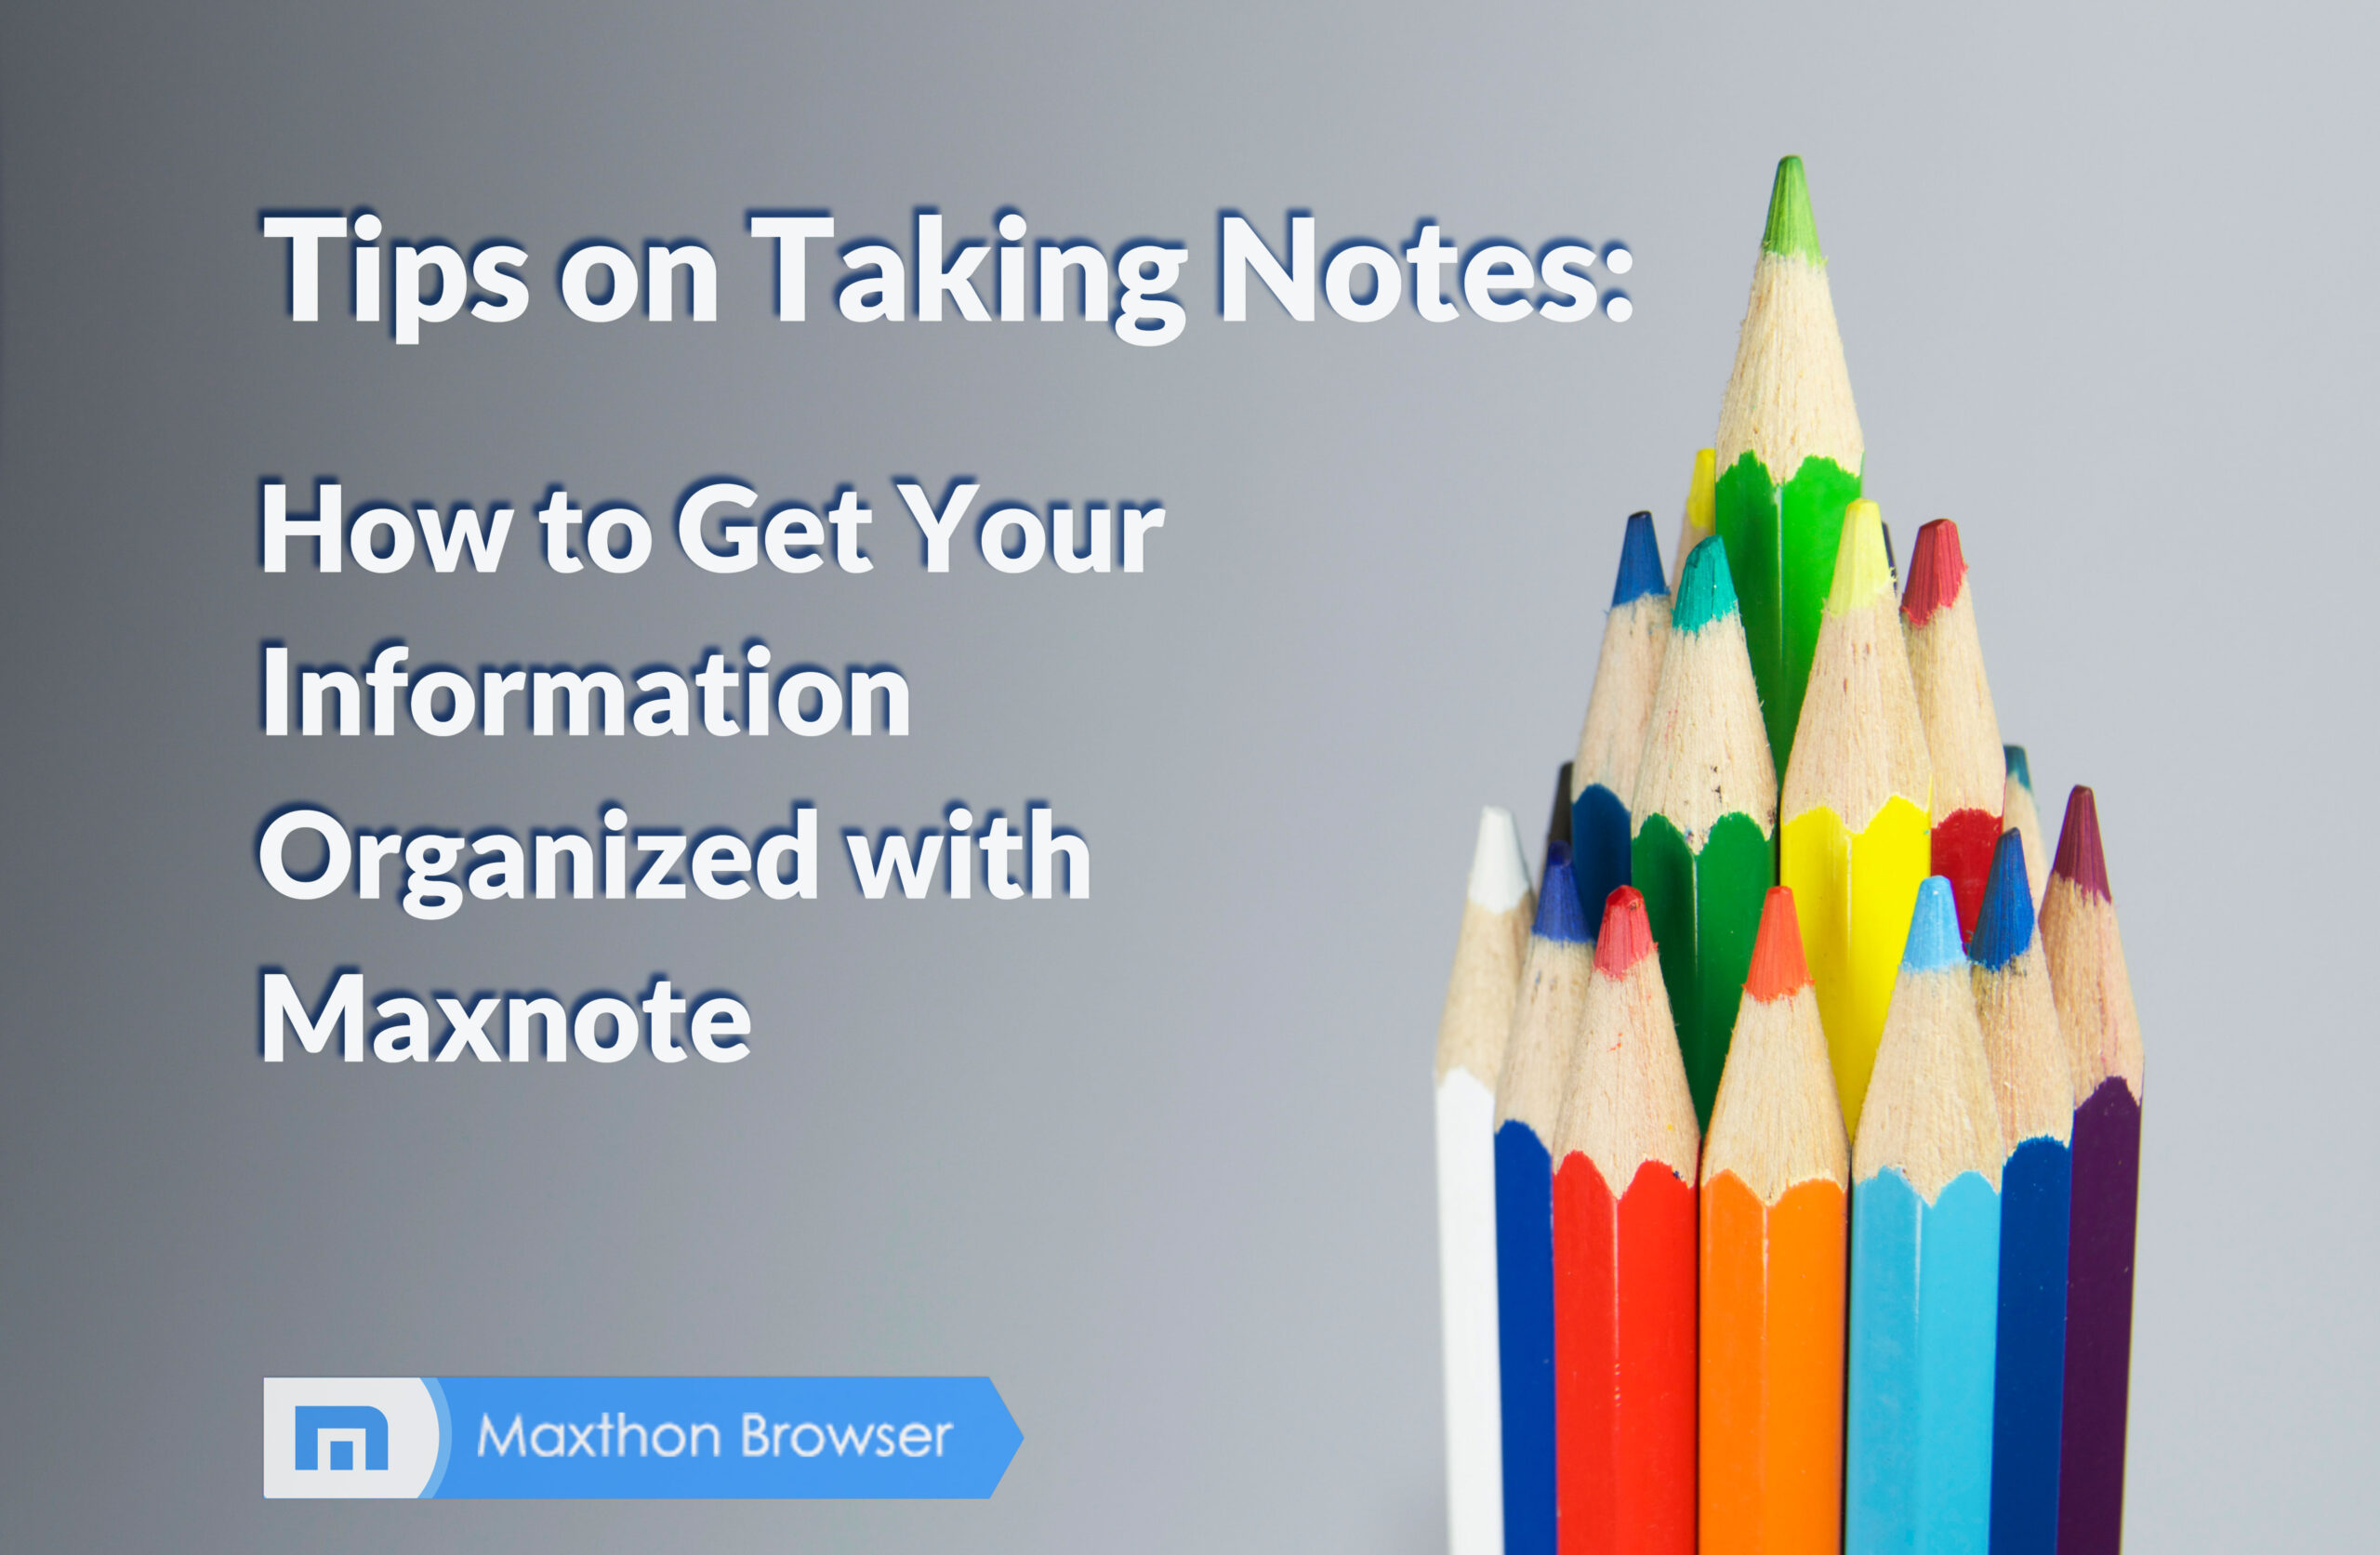 Tips on Taking Notes: How to Get Your Information Organized with Maxnote